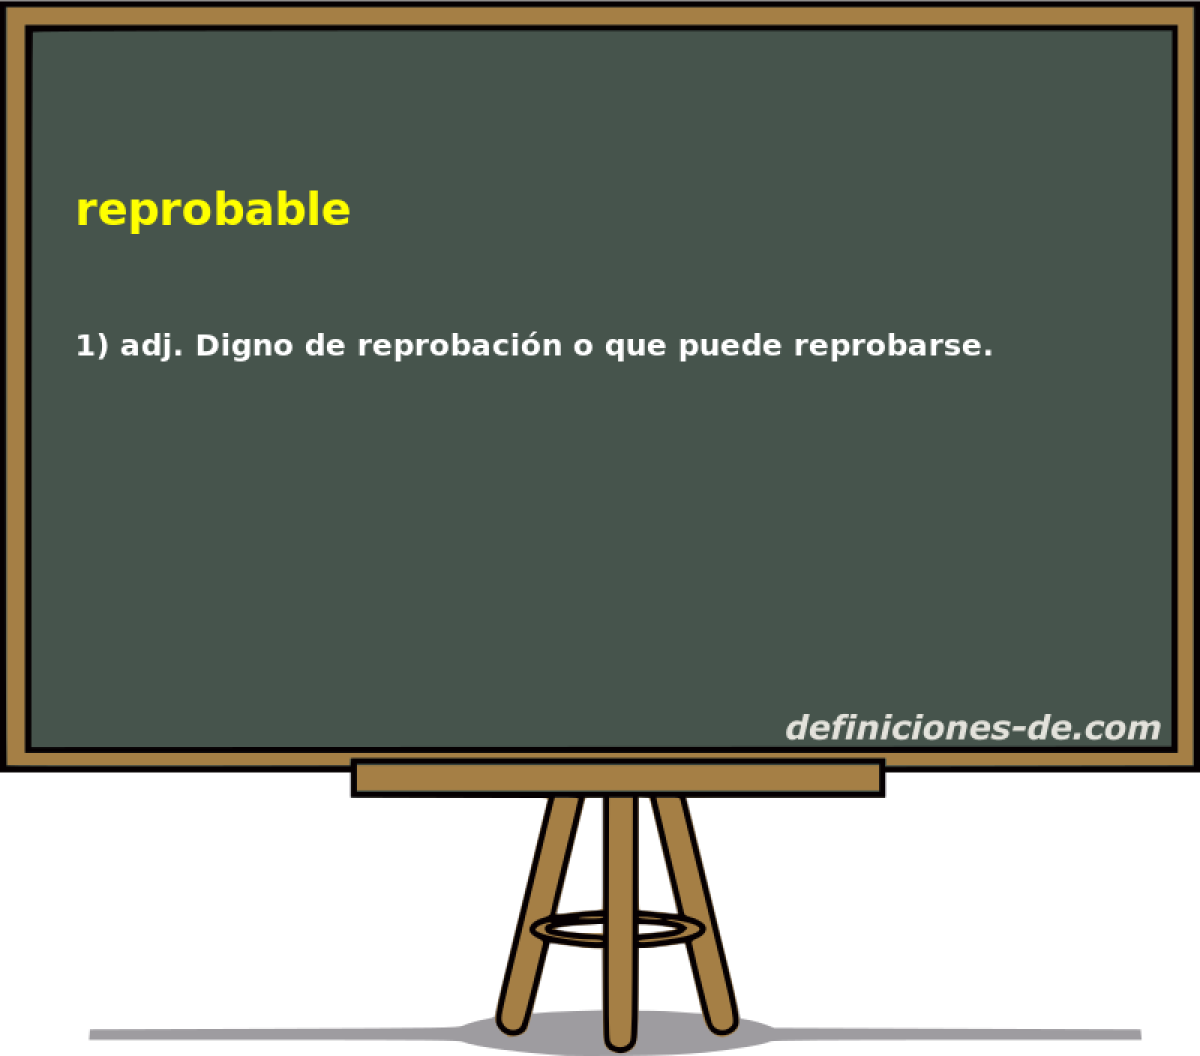 reprobable 